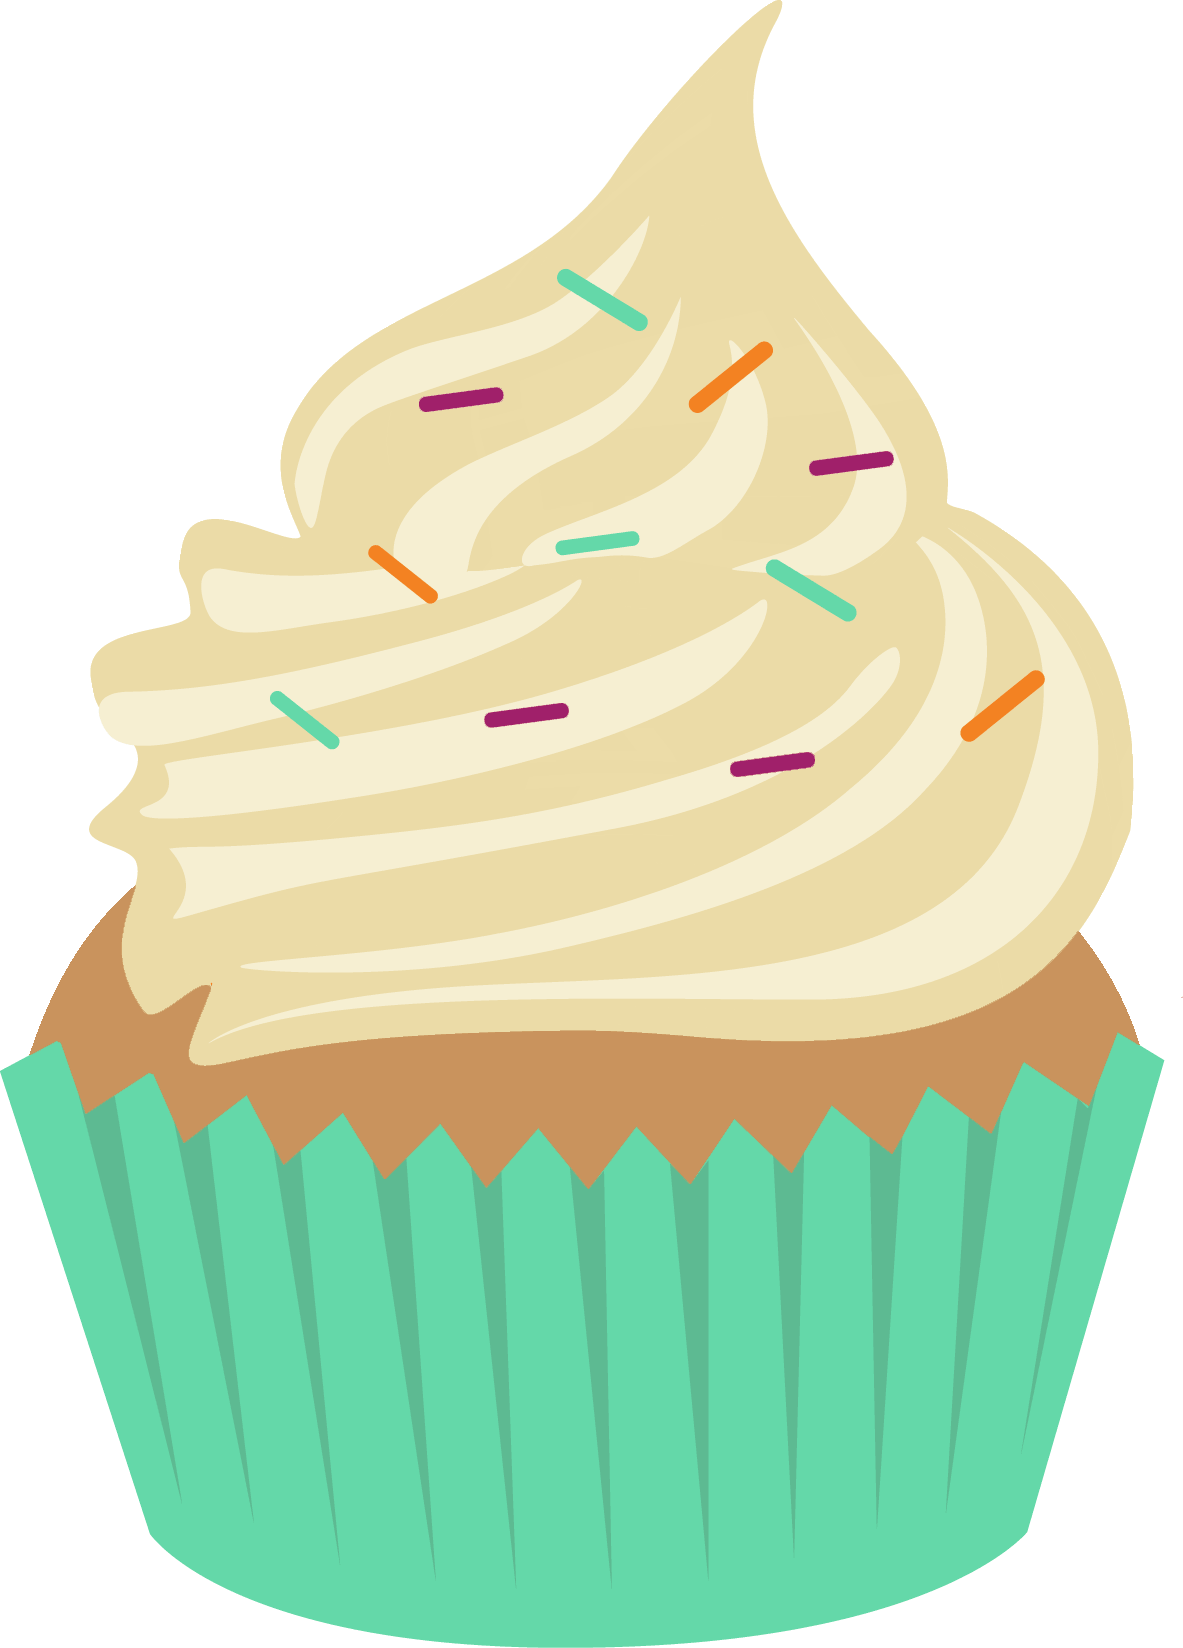 Themontanabookaholic living life through. Clipart cupcake victorian